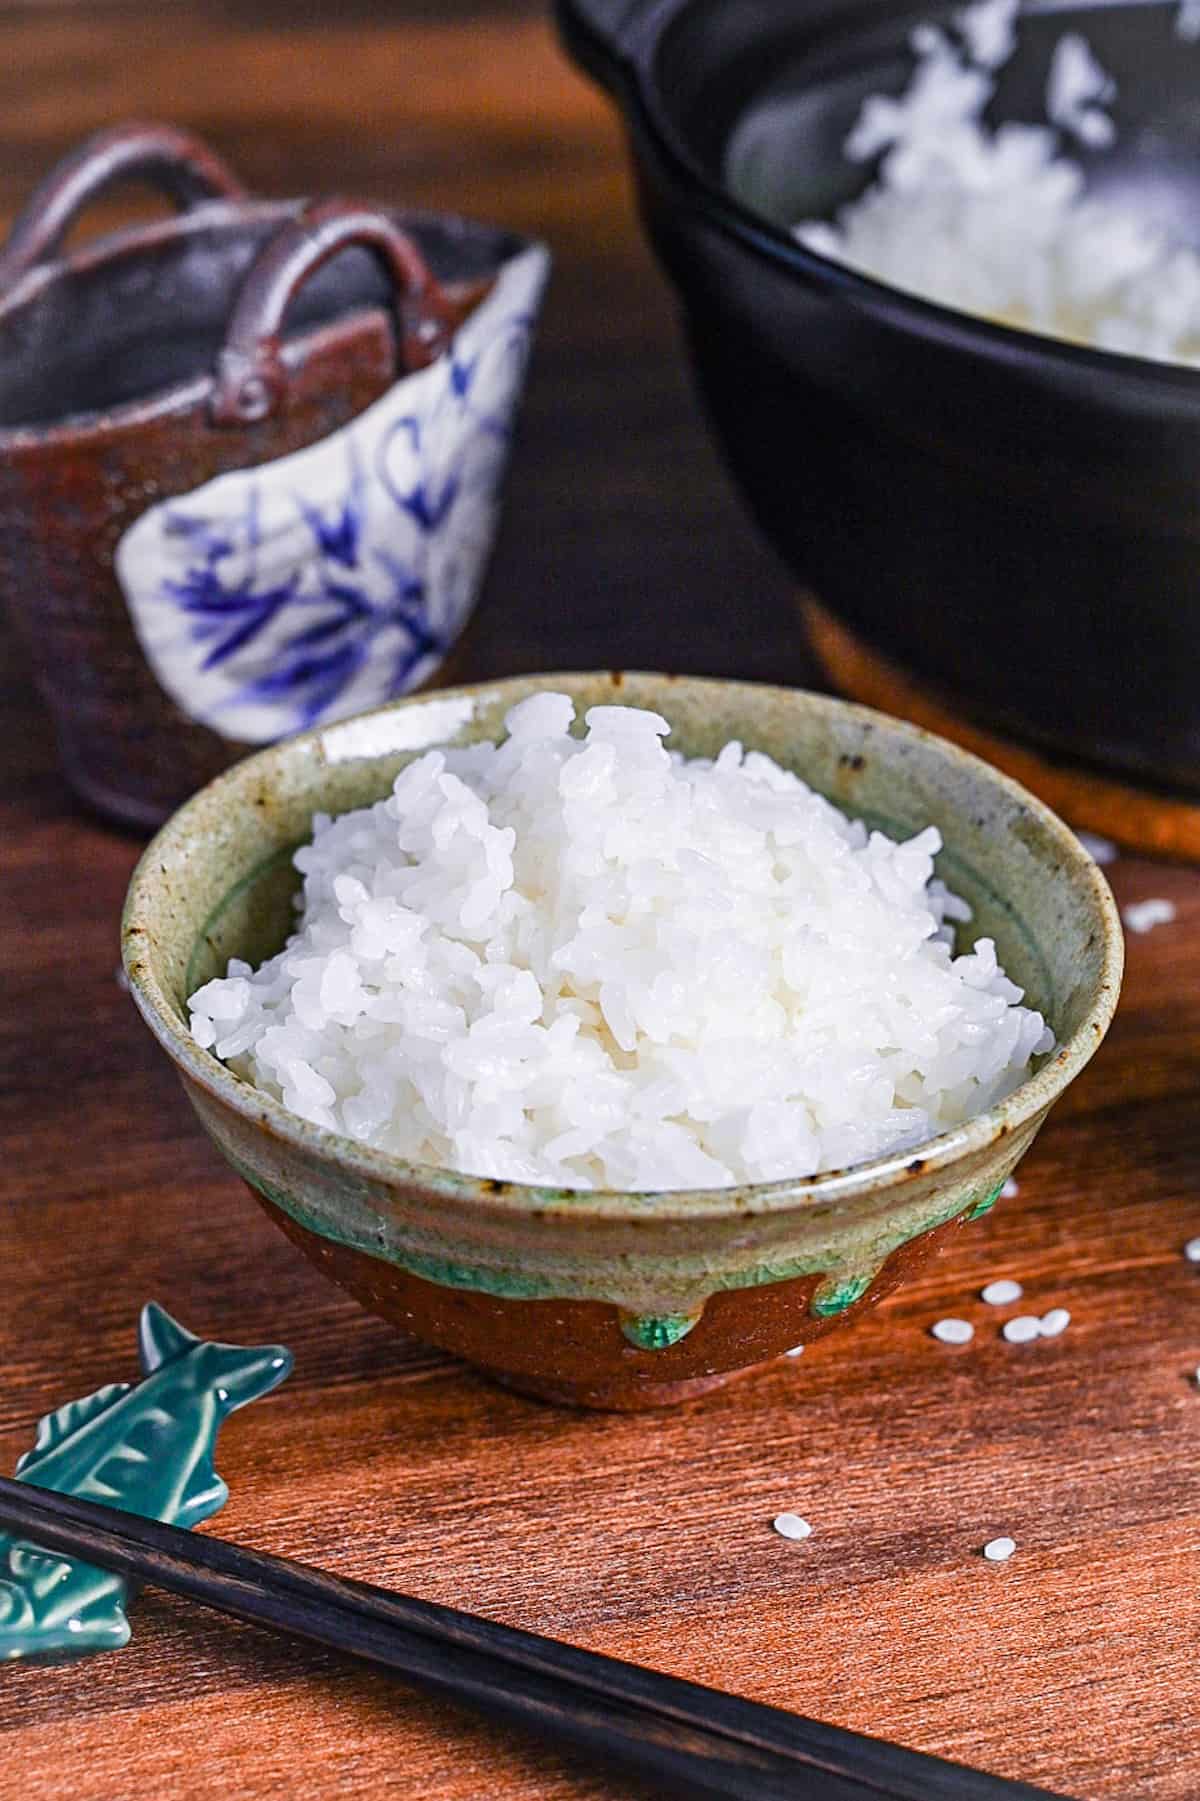 Stove-cooked Japanese white rice in a brown and green ceramic bowl next to a cooking pot, rice paddle cup and black chopsticks